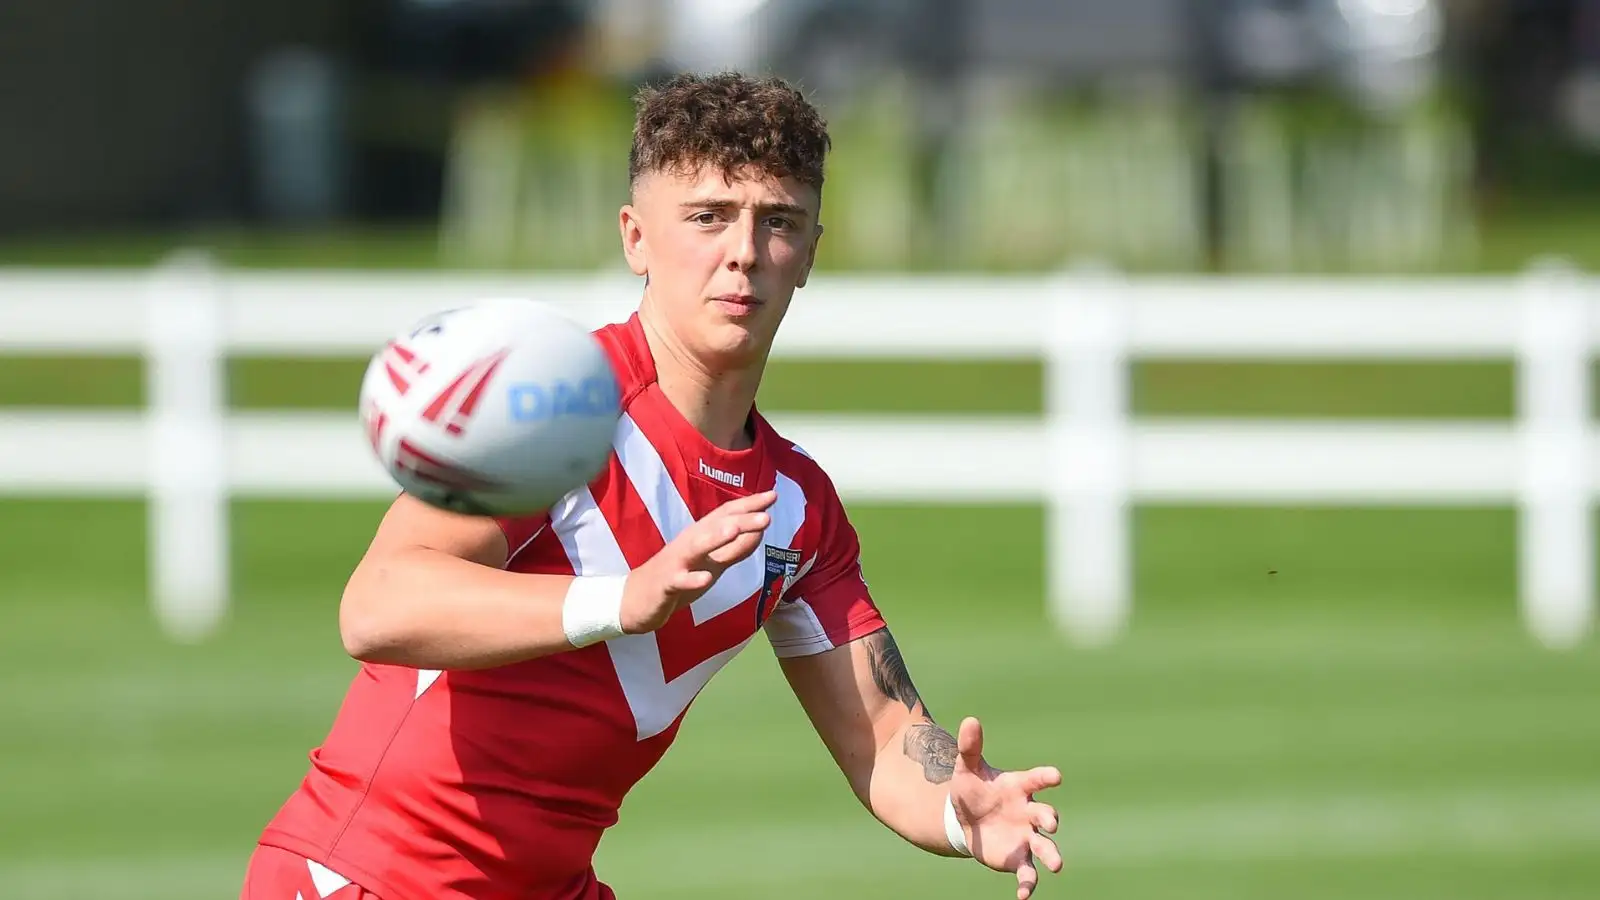 St Helens starlet makes Championship move on long-term deal following successful loan: ‘It’s made me realise why I play rugby’